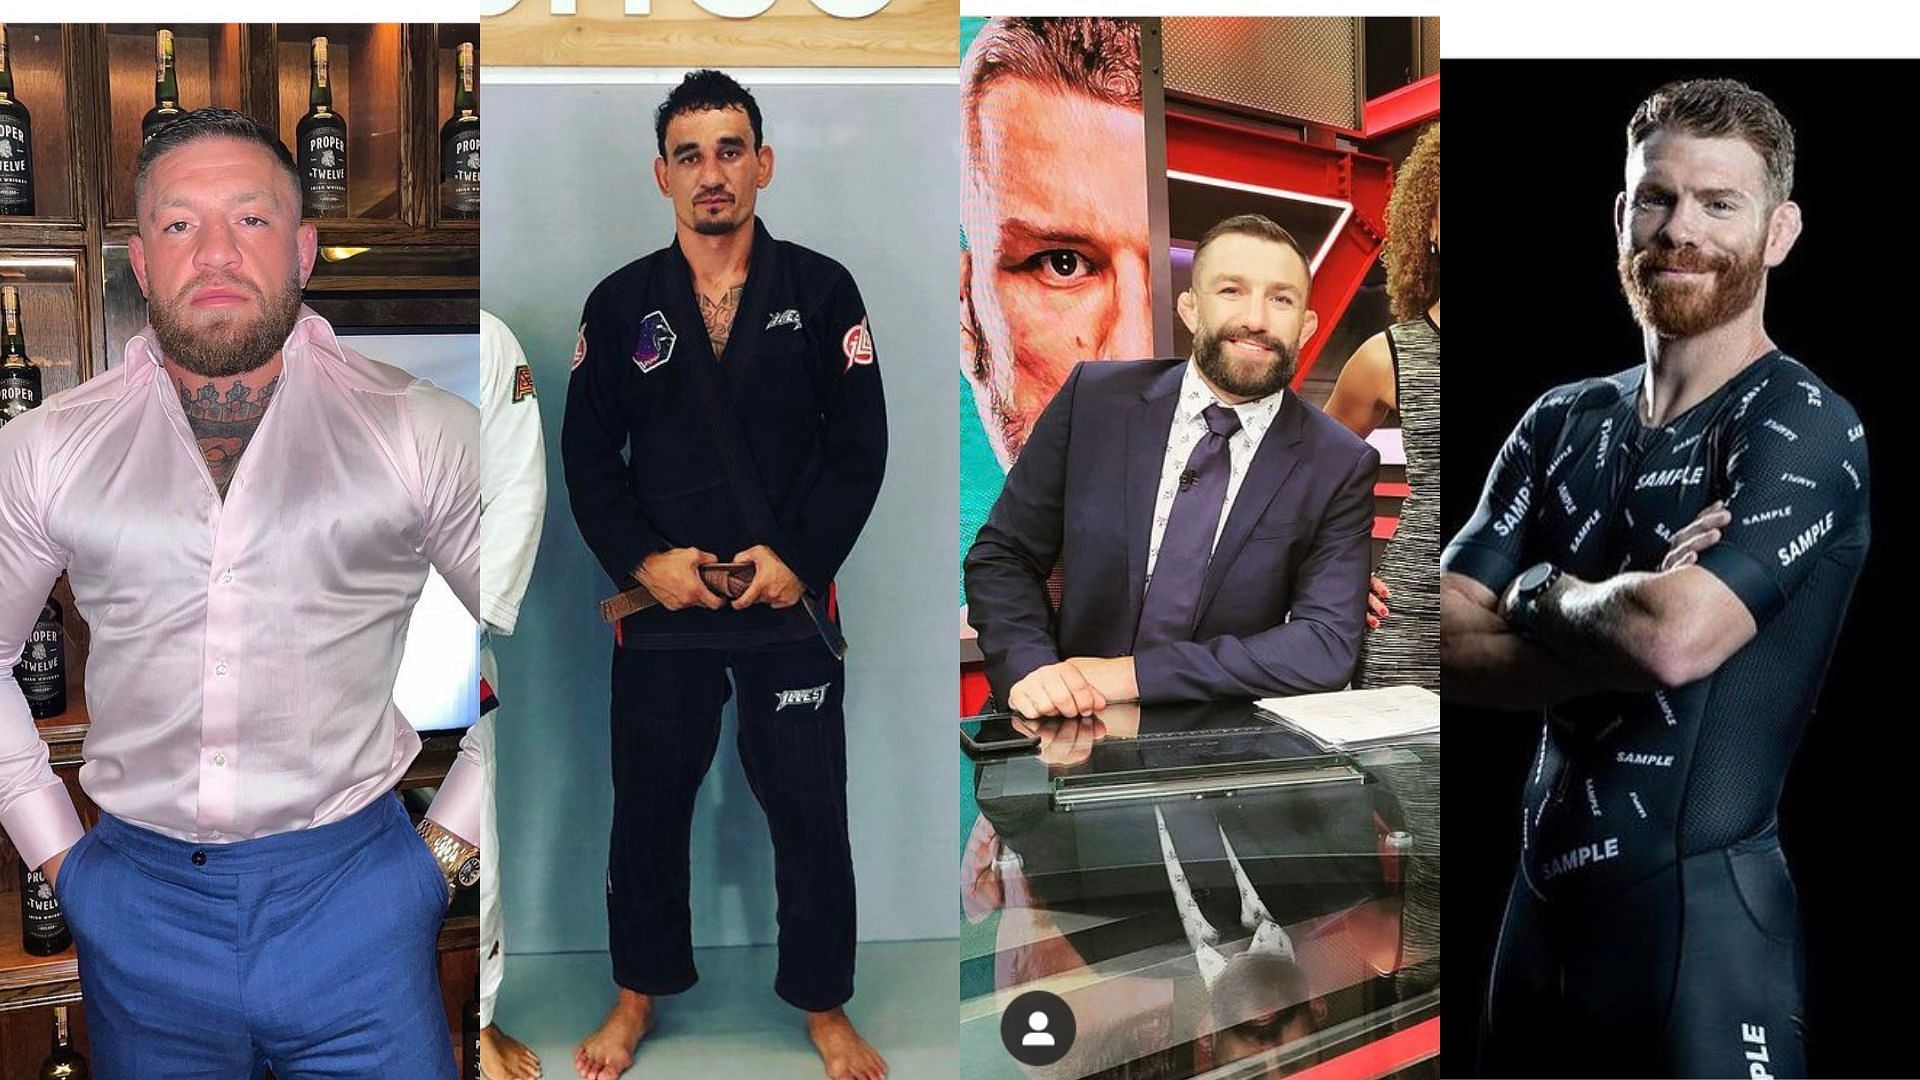 Conor McGregor (far left), Max Holloway (second from left), Michael Chiesa (second from right), and Paul Felder (far right) [Images courtesy: @thenotoriousmma, @blessedmma, @mikemav22, @felderpaul on Instagram]